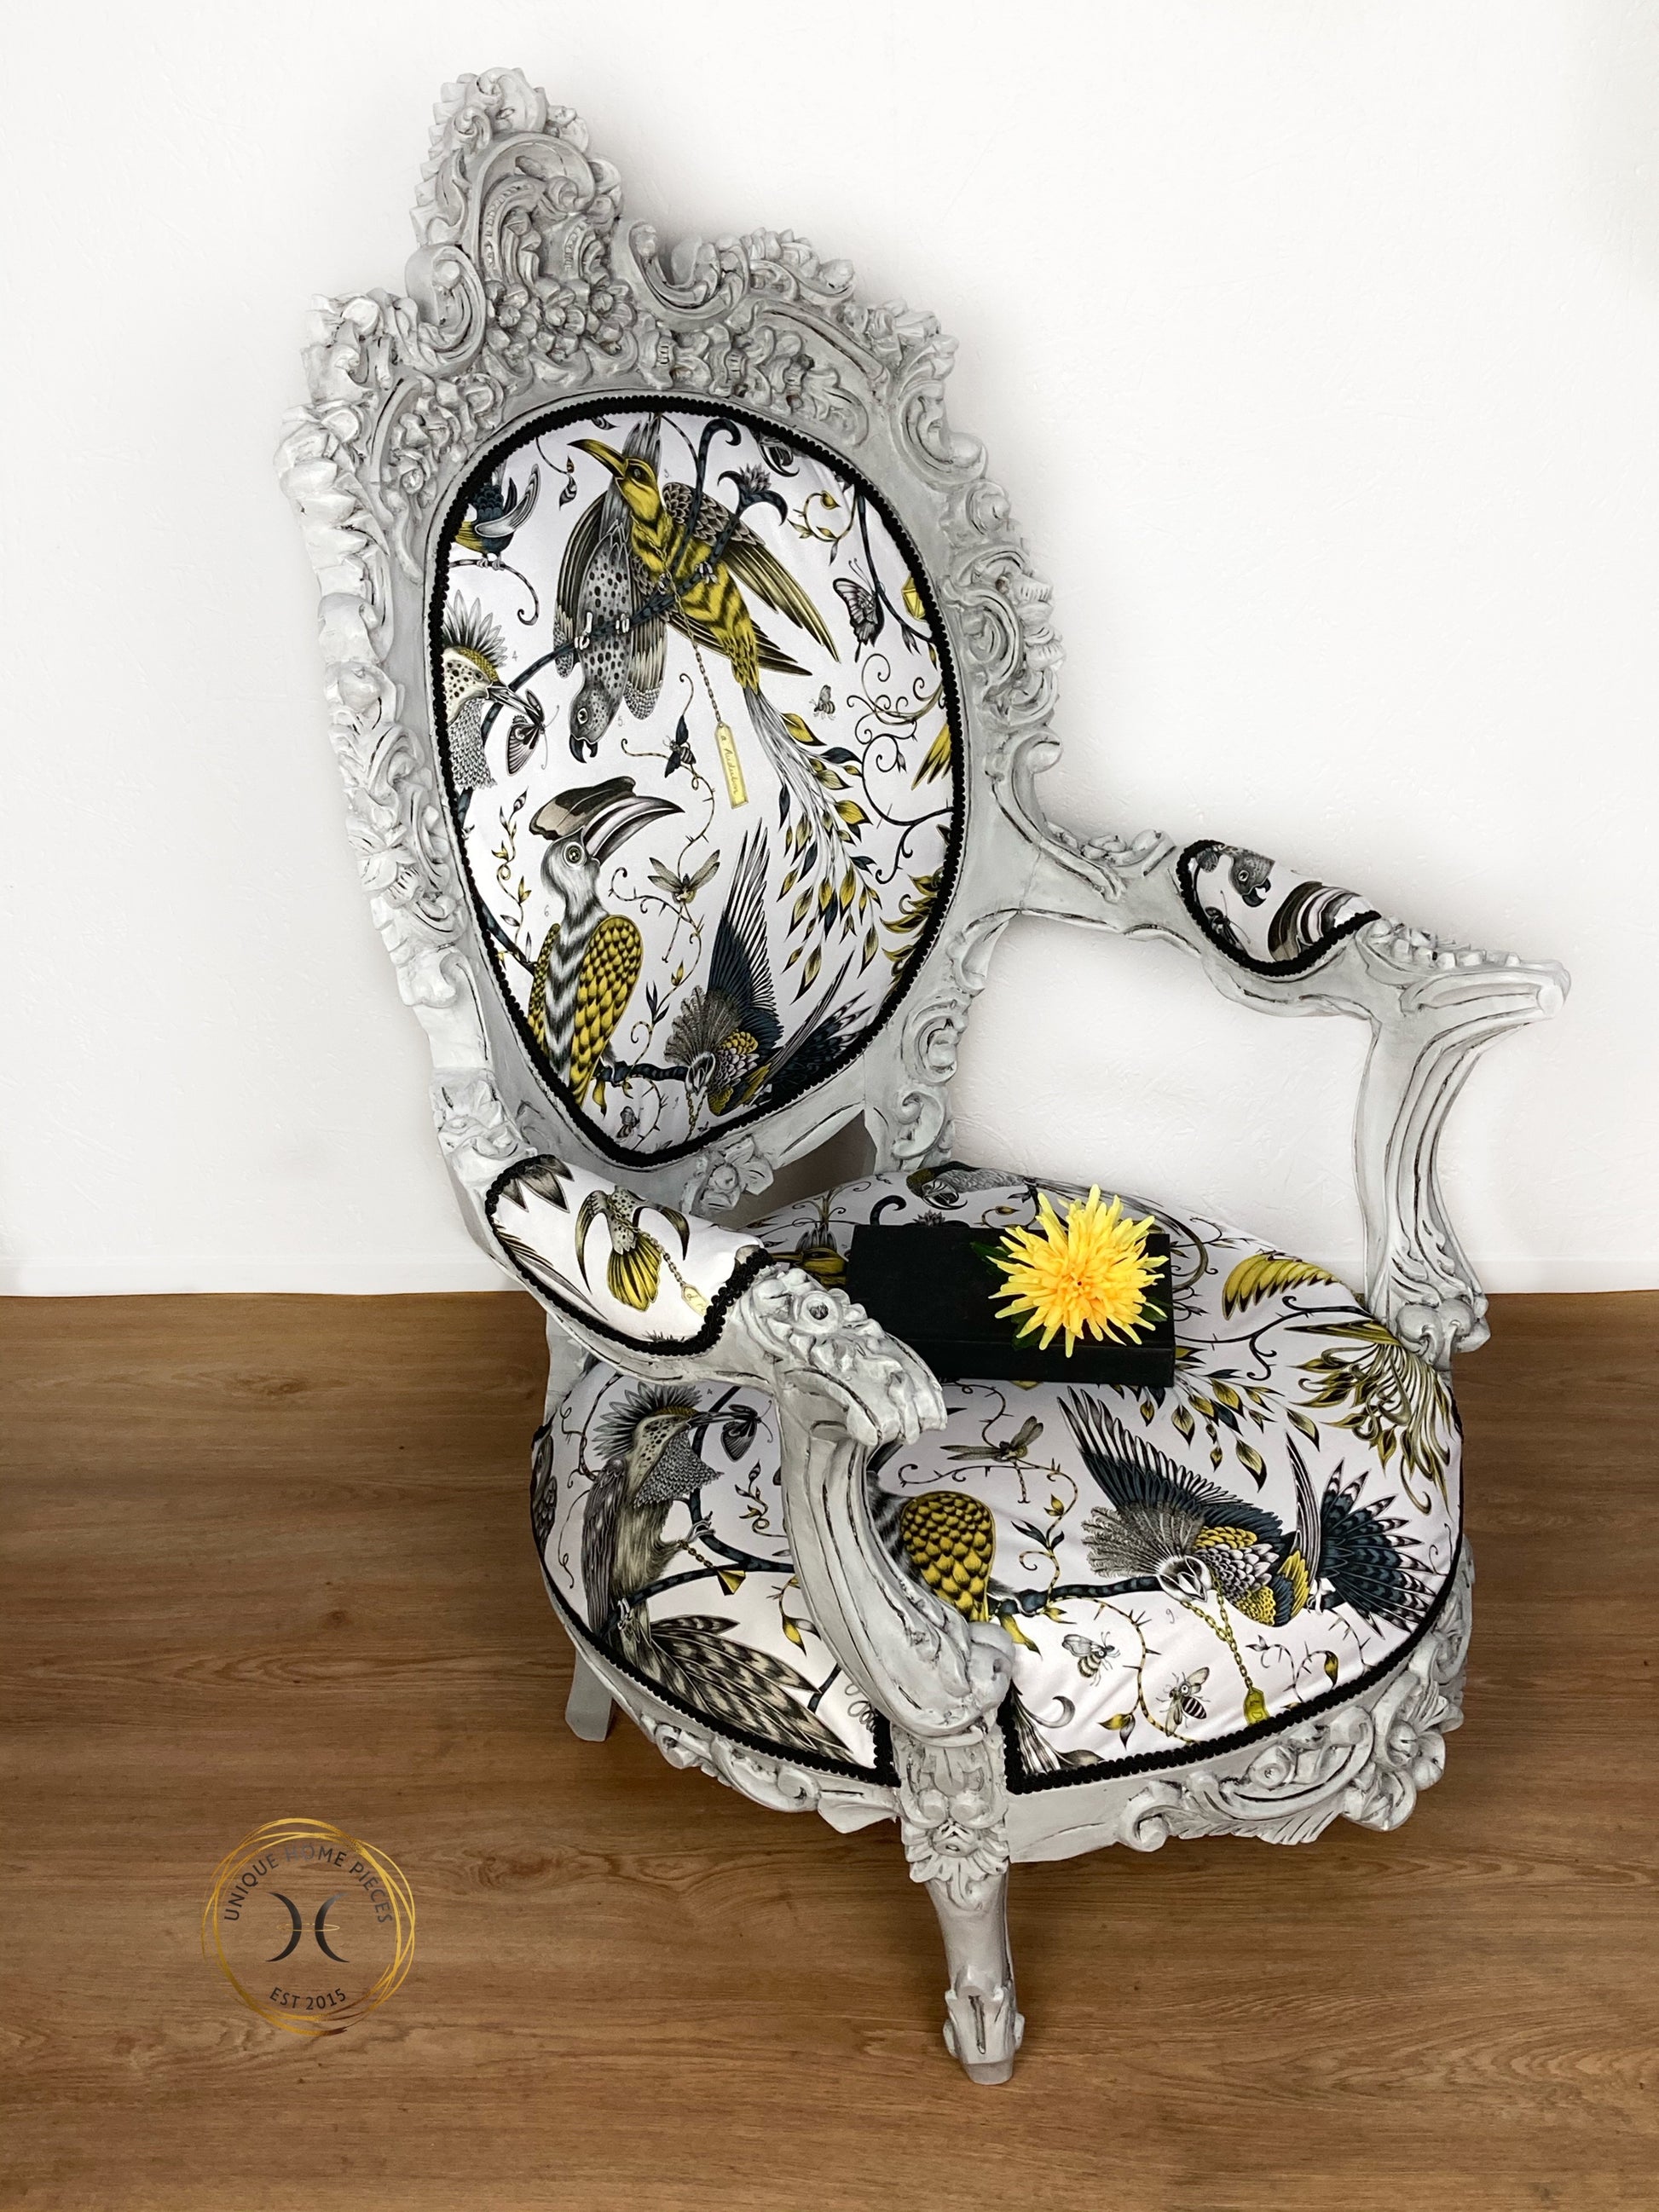 Hand Carved Grey Queen Throne With  Emma Shipley Fabric - Unique Home Pieces